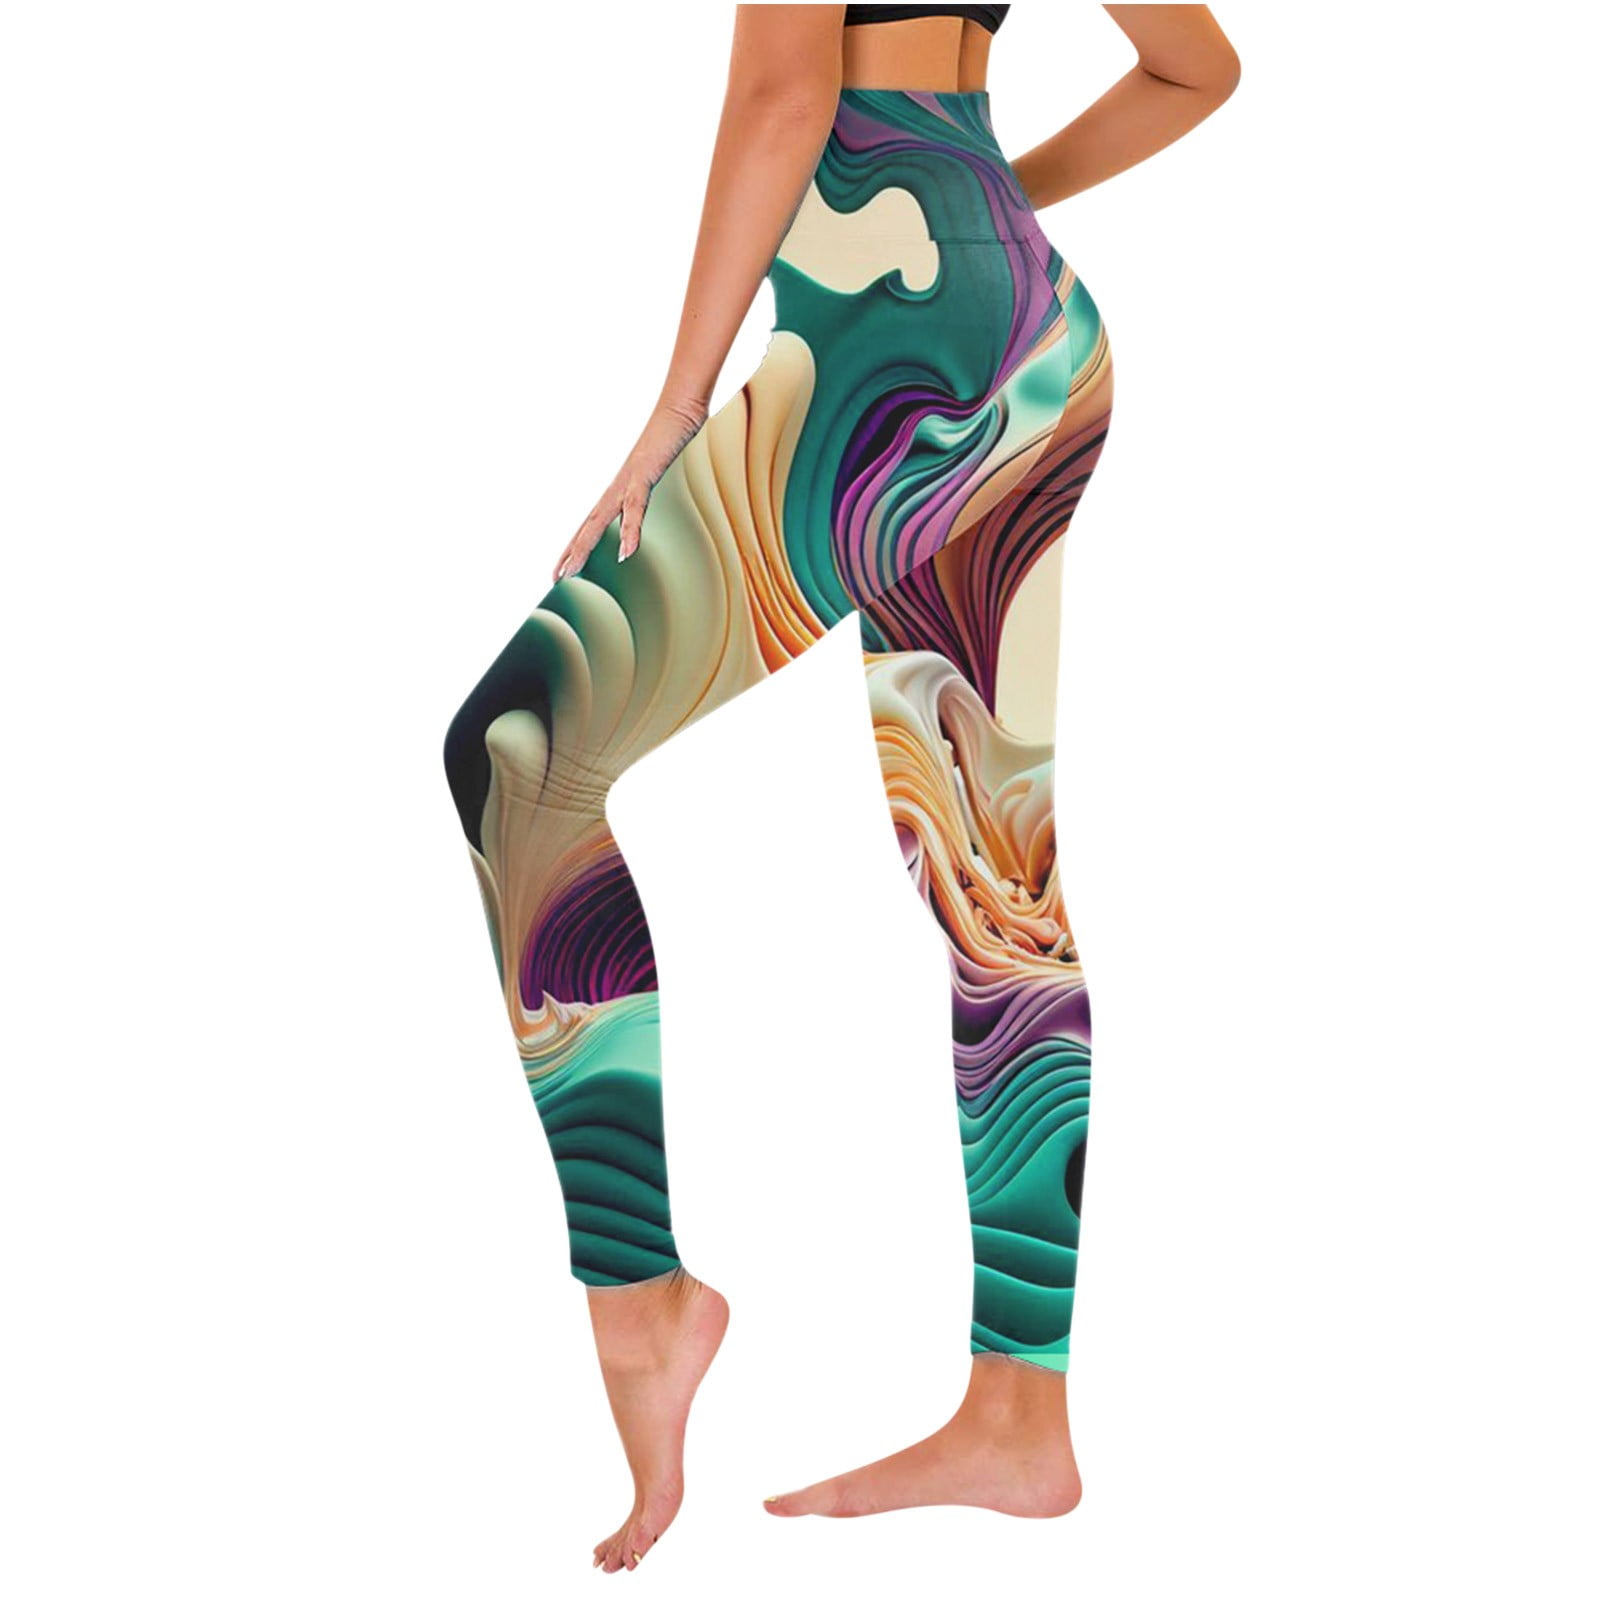 SELONE Leggings for Women Plus Size Fitted Printed Yoga Long Pant ’s  Stretch Leggings Fitness Running Gym Sports Full Length Active Pants Full  Length